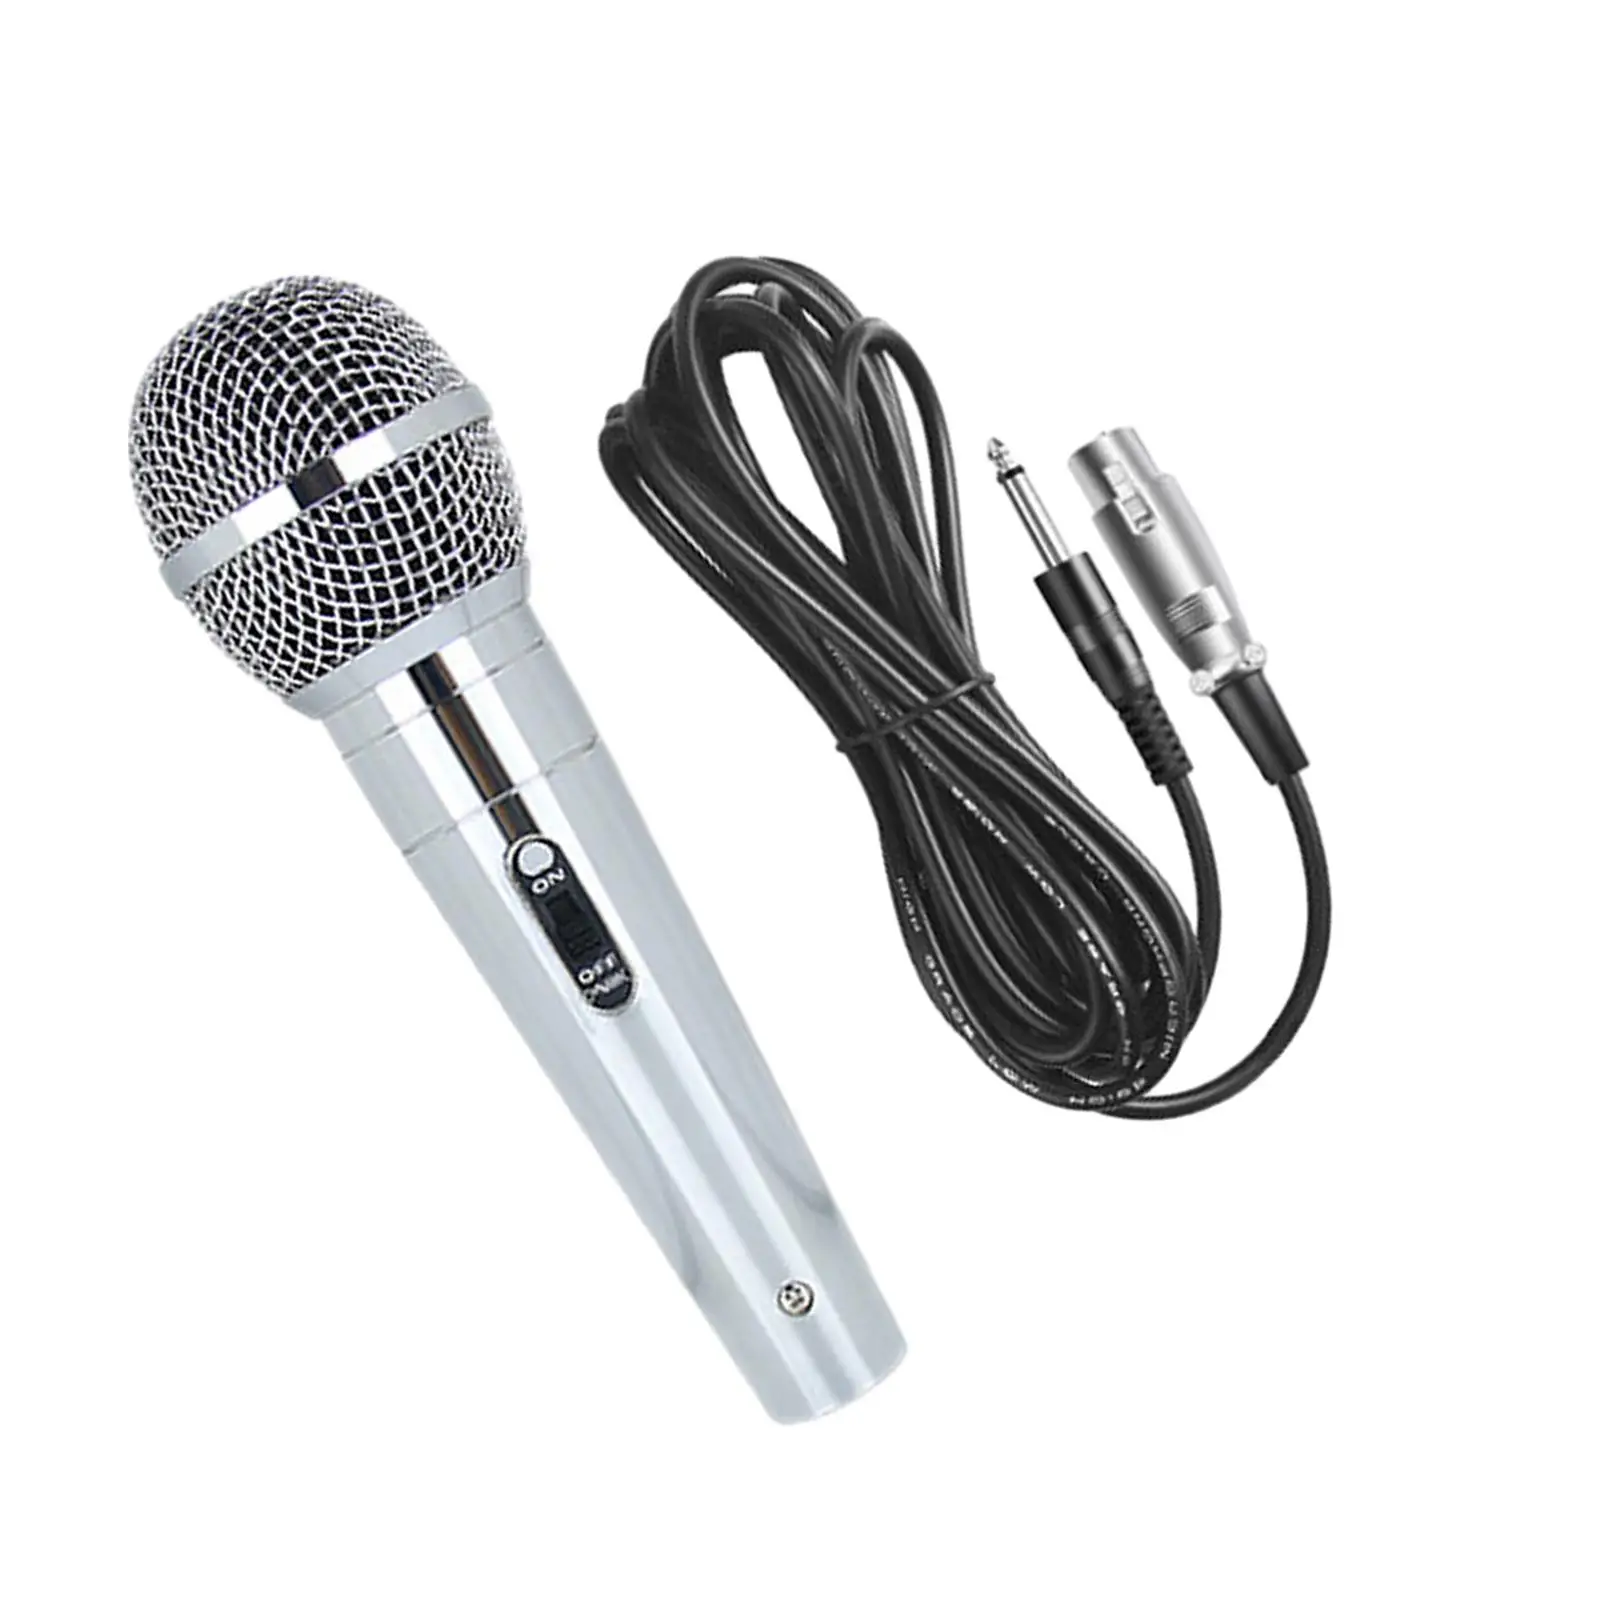 Karaoke Microphone High Performance with 3M Cable Wired Handheld Mic Handheld Microphone for Performance Stage Speaker Party DJ